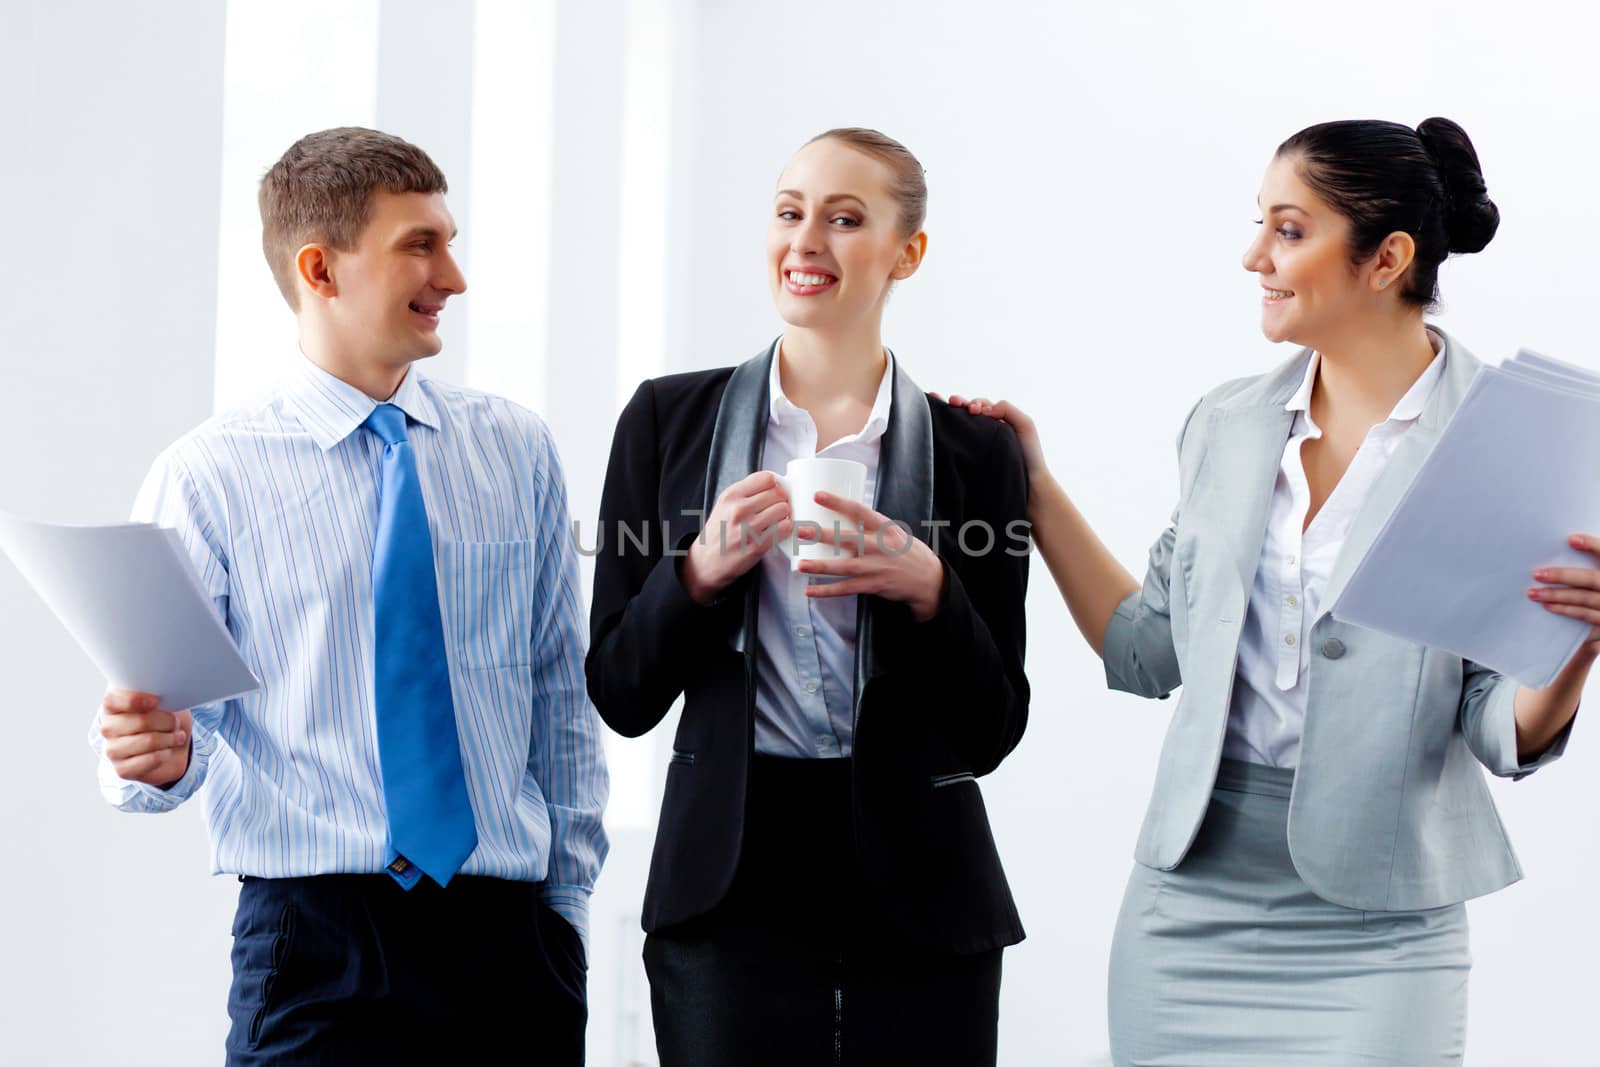 Image of three young businesspeople laughing joyfully